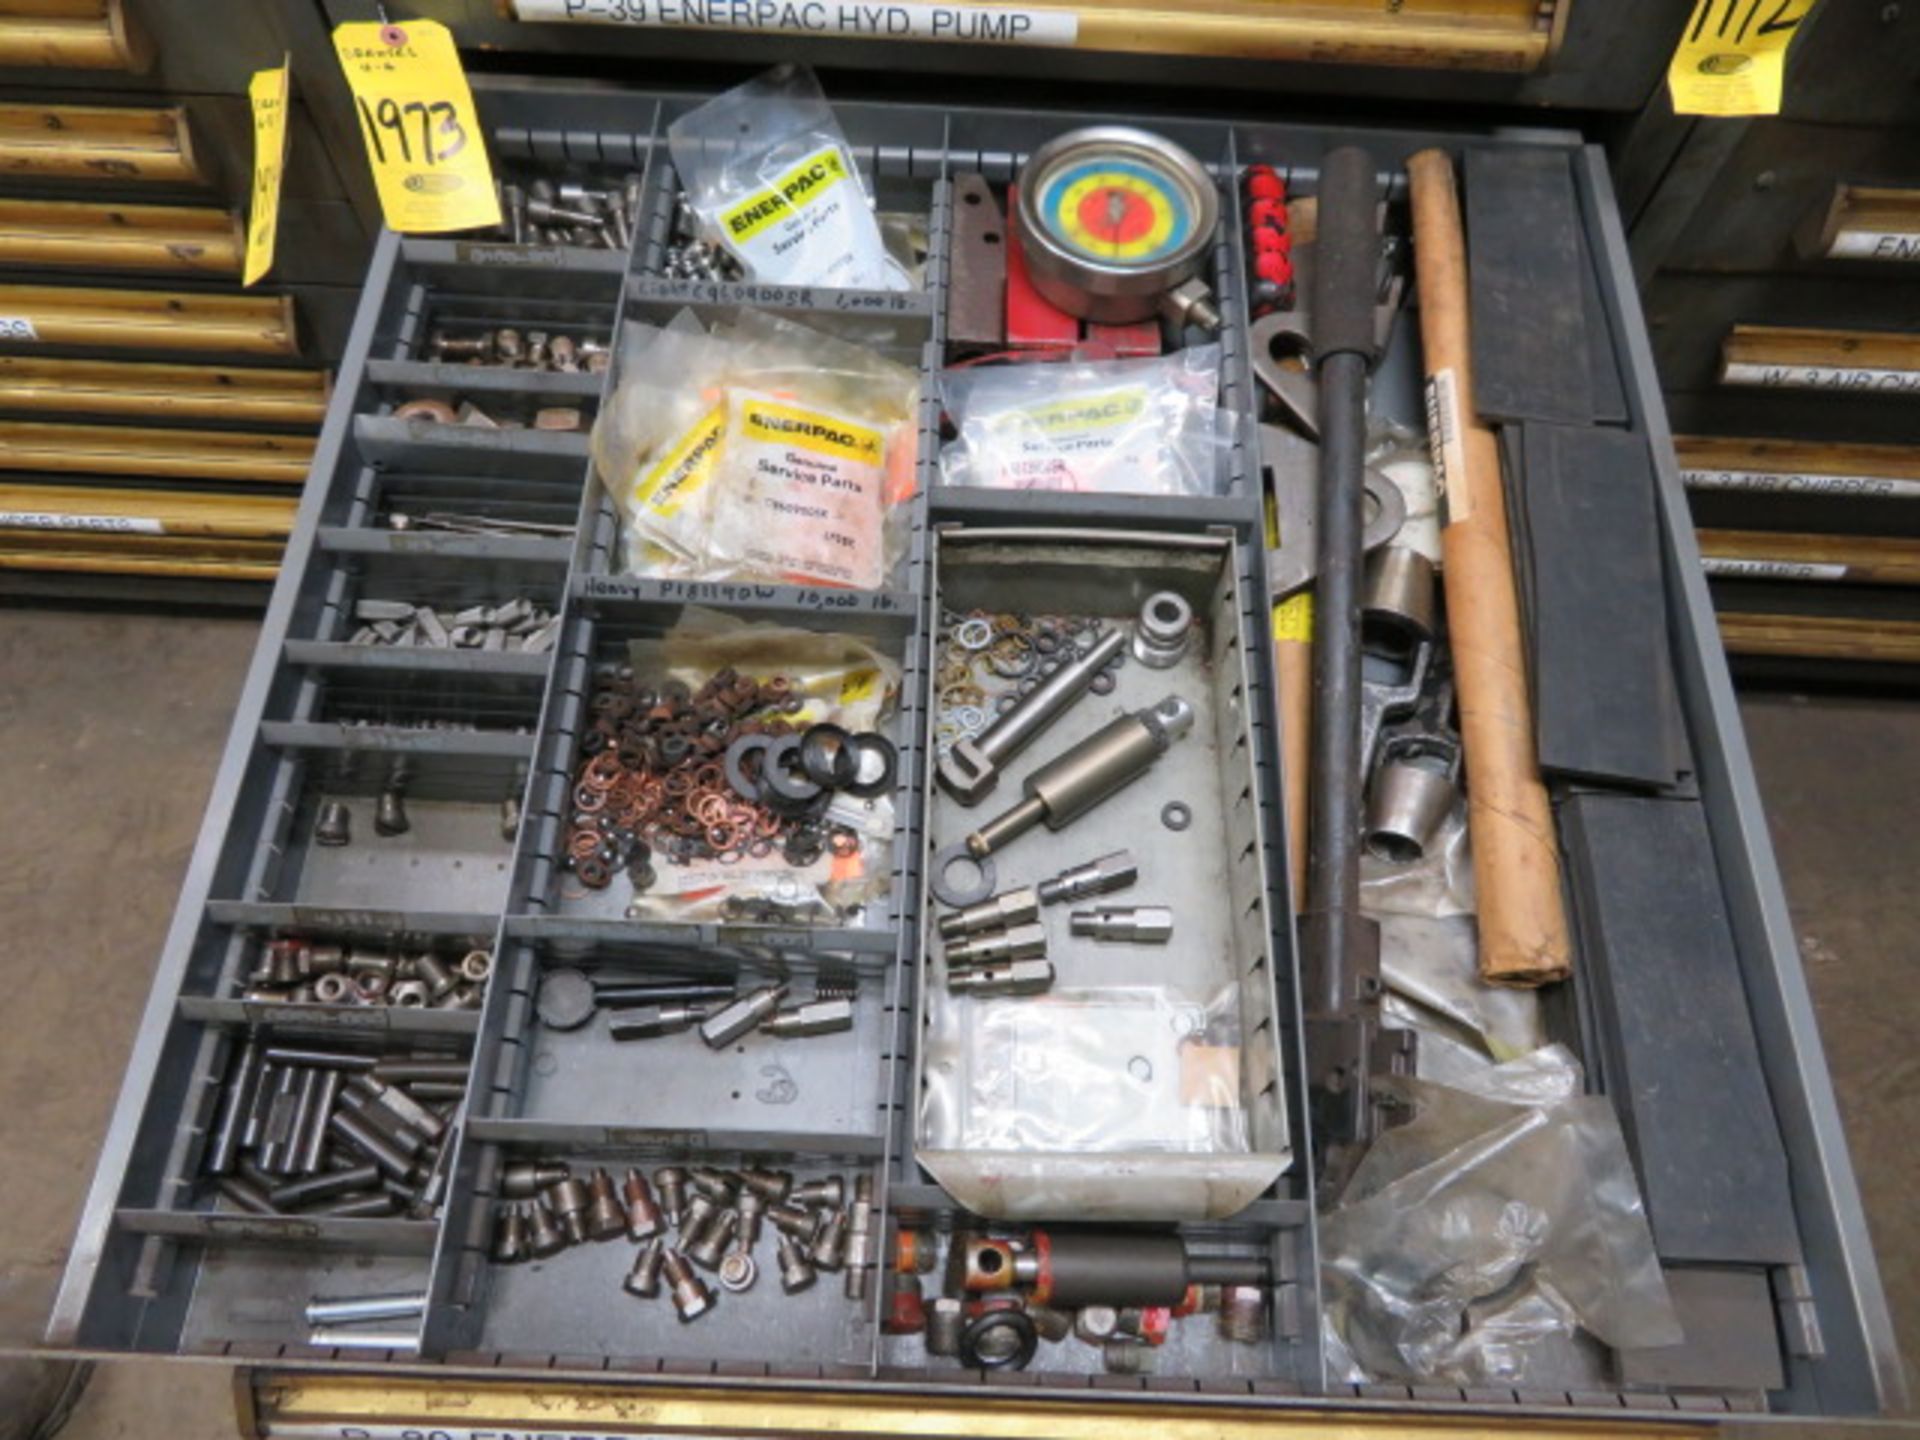 CONTENTS OF DRAWERS 4, 5, 6 - P-39 ENERPAC HYD PUMP PARTS, P-80 ENERPAC HYD PUMP PARTS - Image 2 of 3